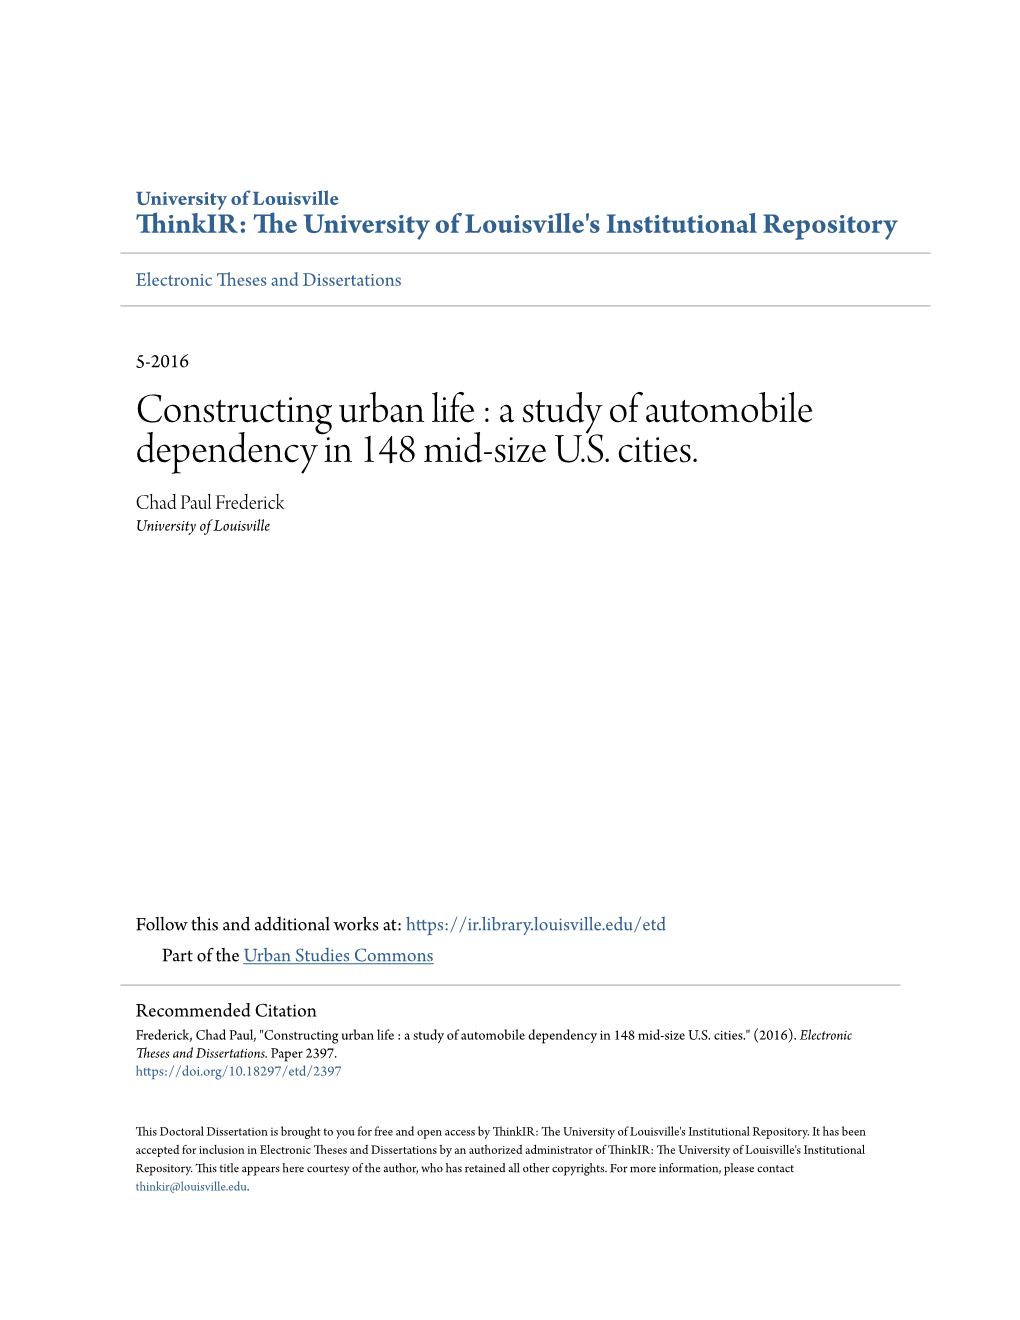 A Study of Automobile Dependency in 148 Mid-Size US Cities